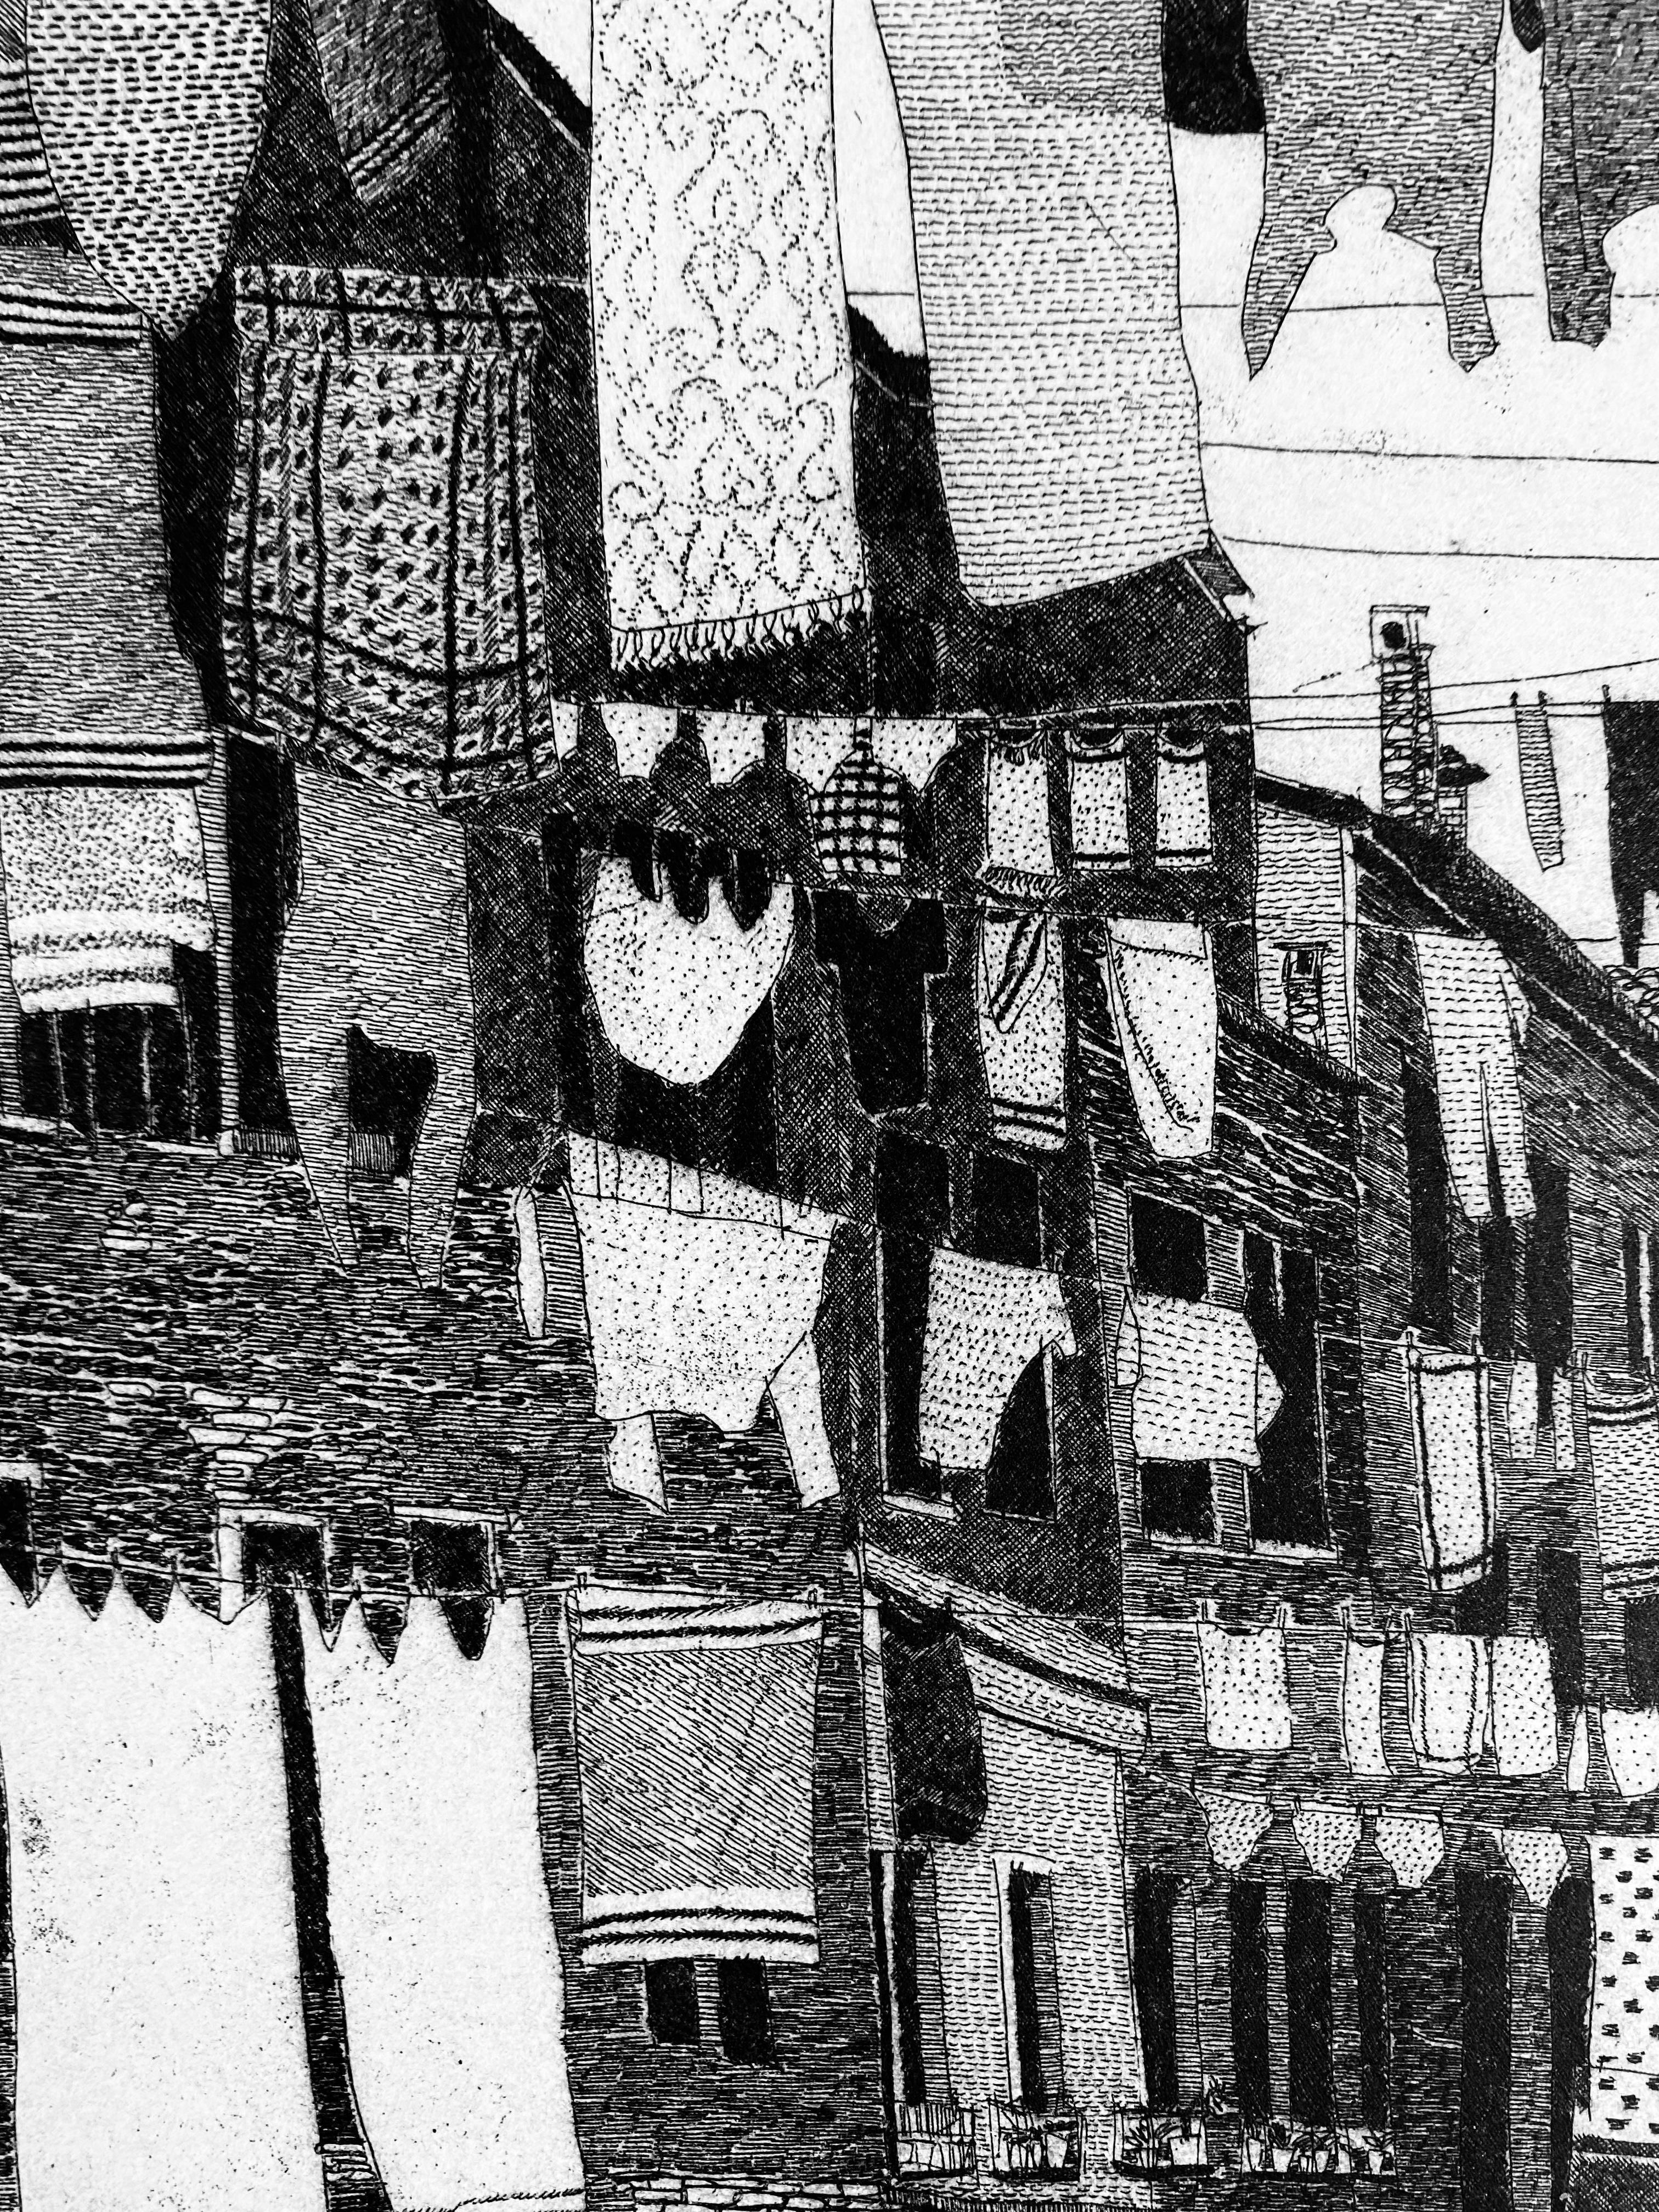 Poetic Venice etching landscape of daily italian city routine   - Print by Federica Galli